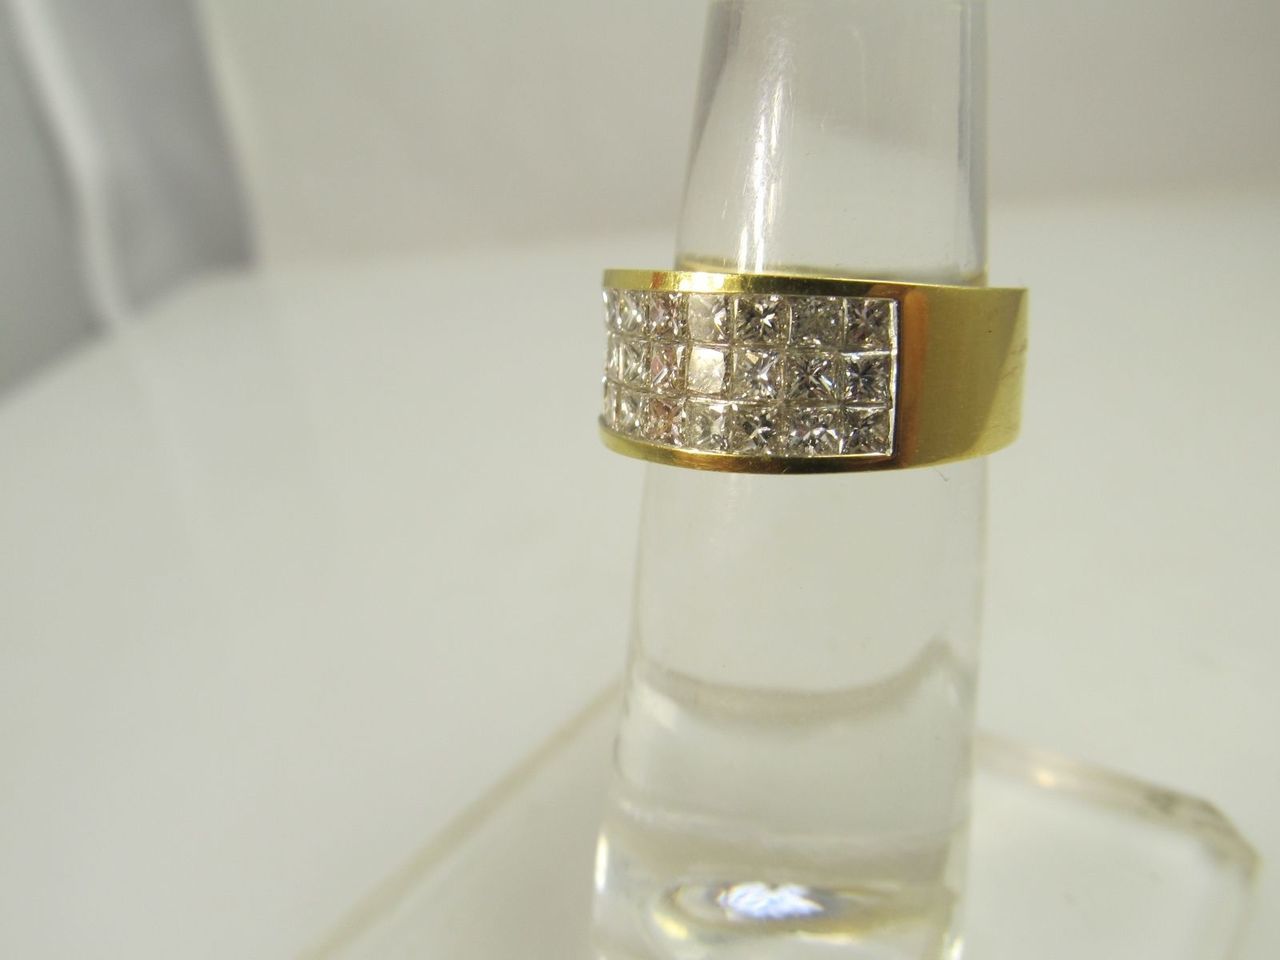 18k yellow gold band with 1.35cts in illusion set princess cut diamonds